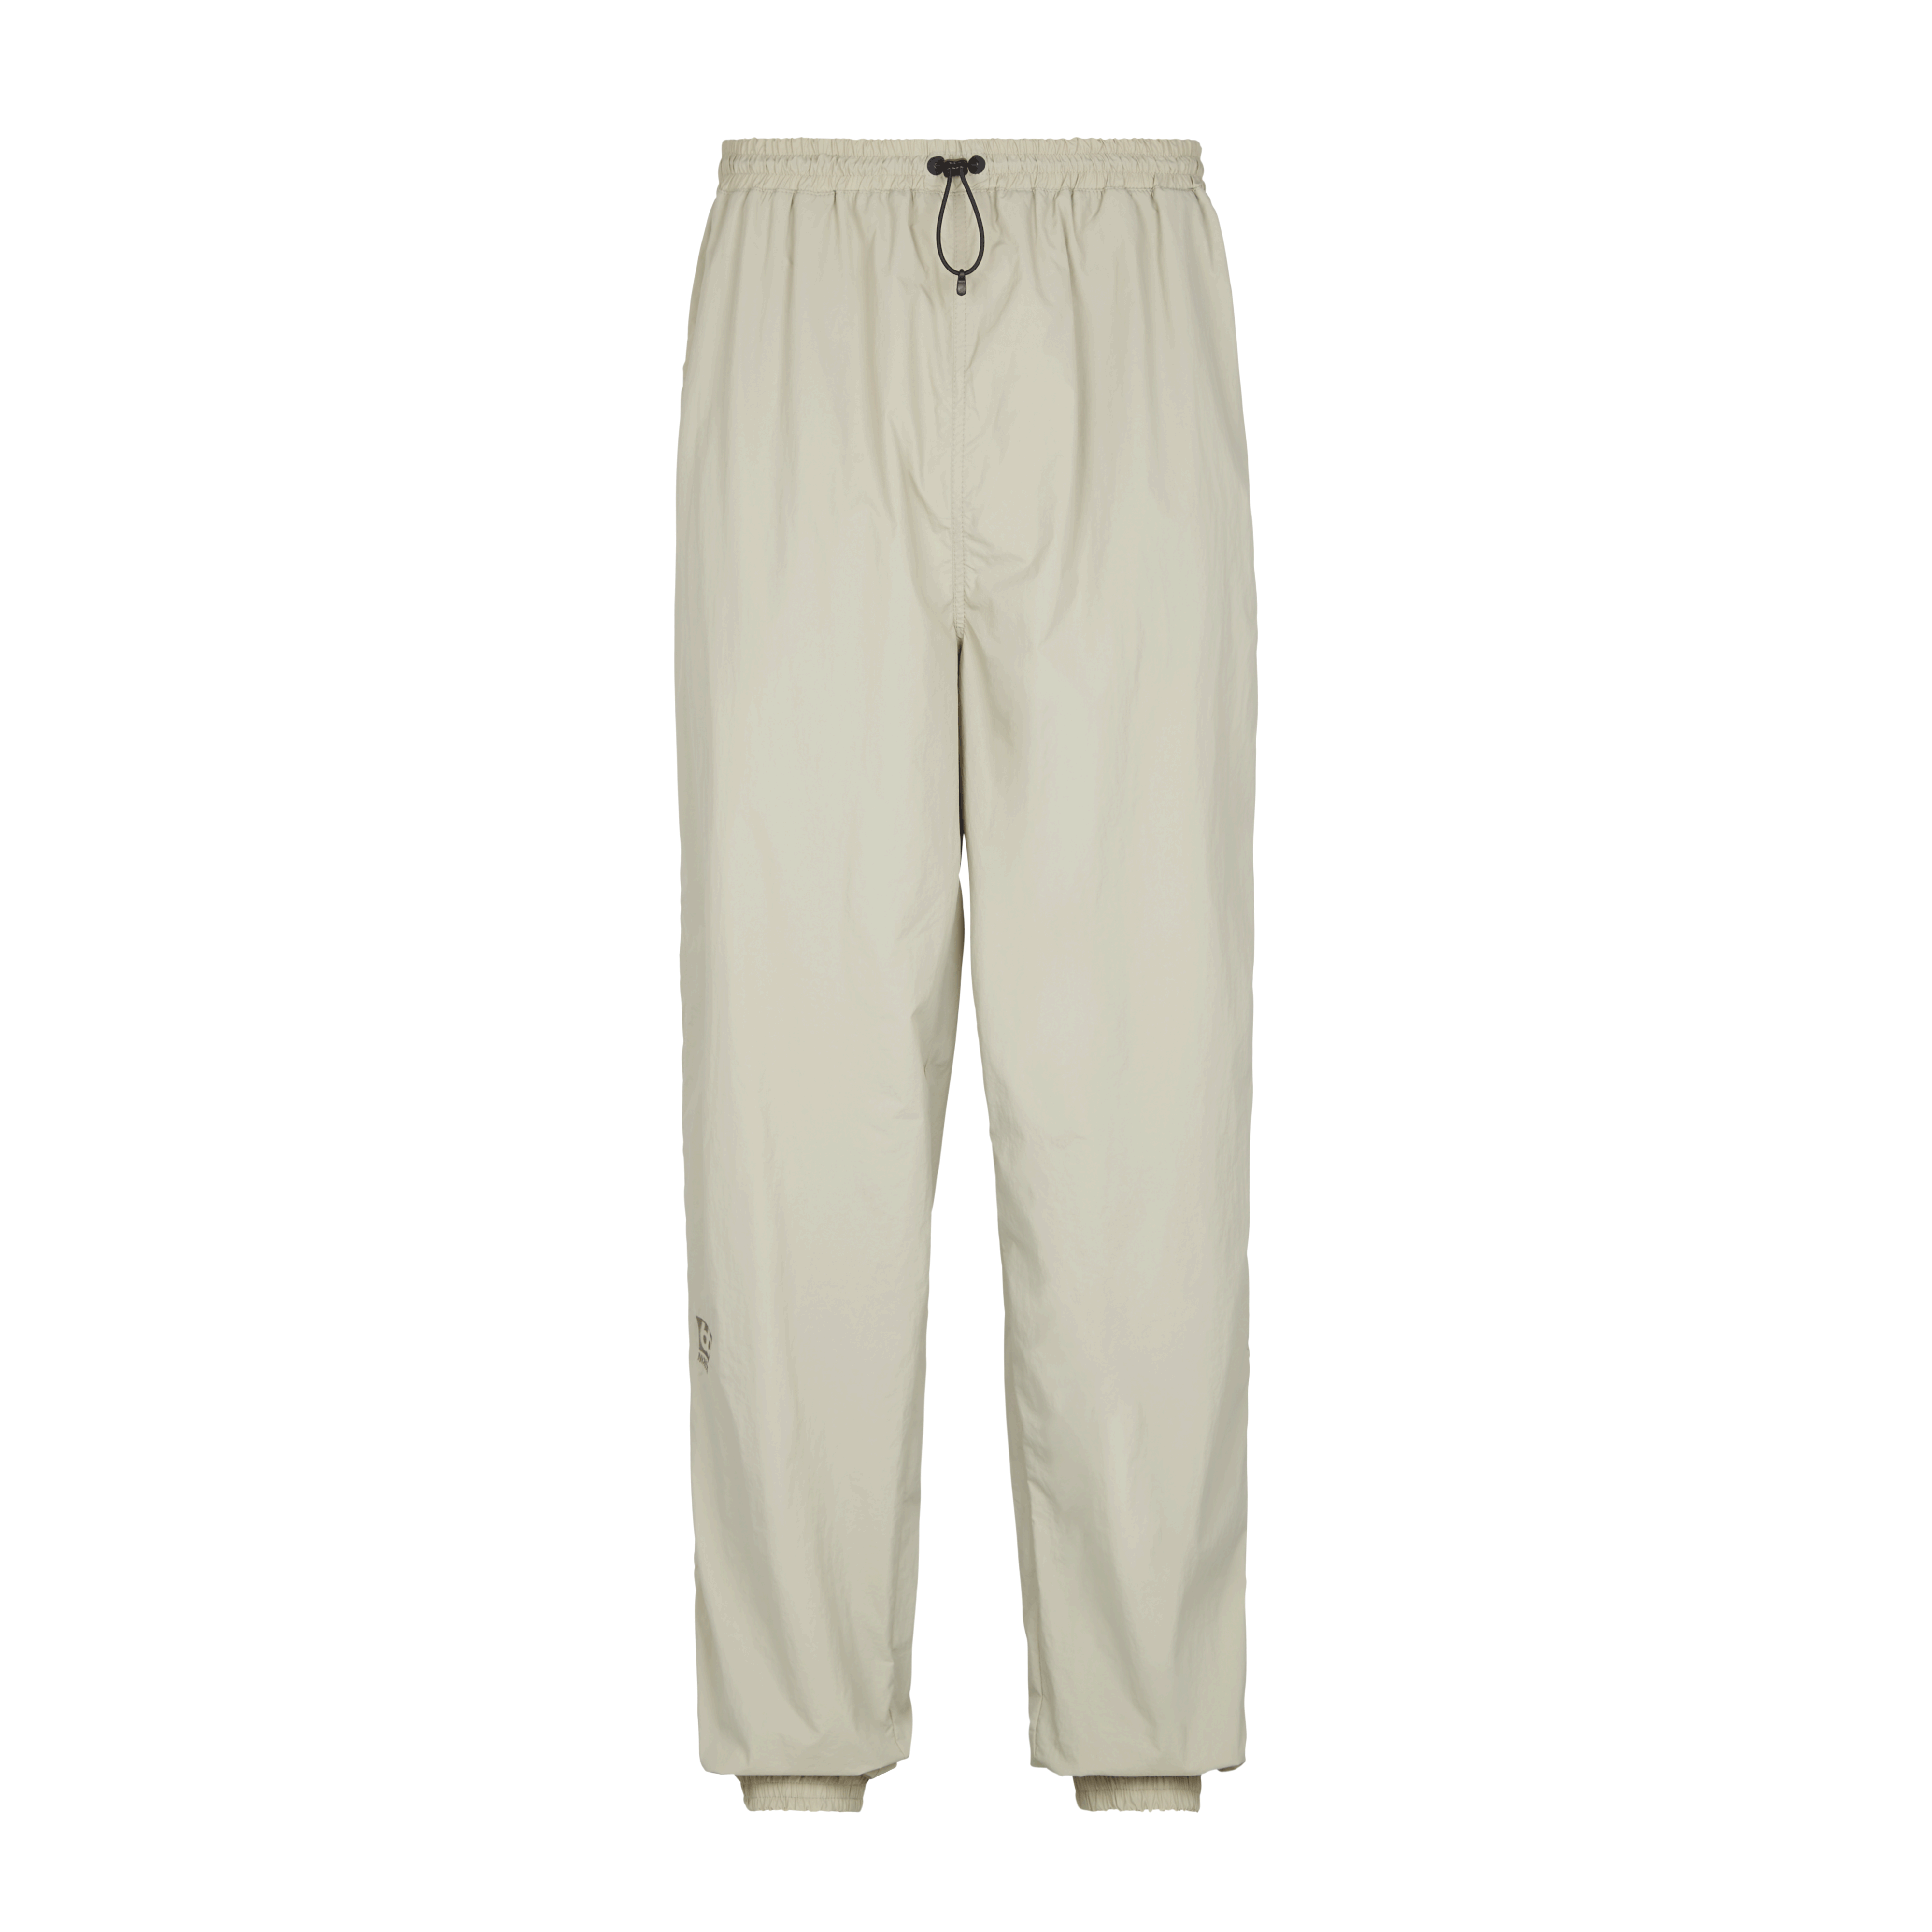 66 North Men's Laugardalur Bottoms In Grey